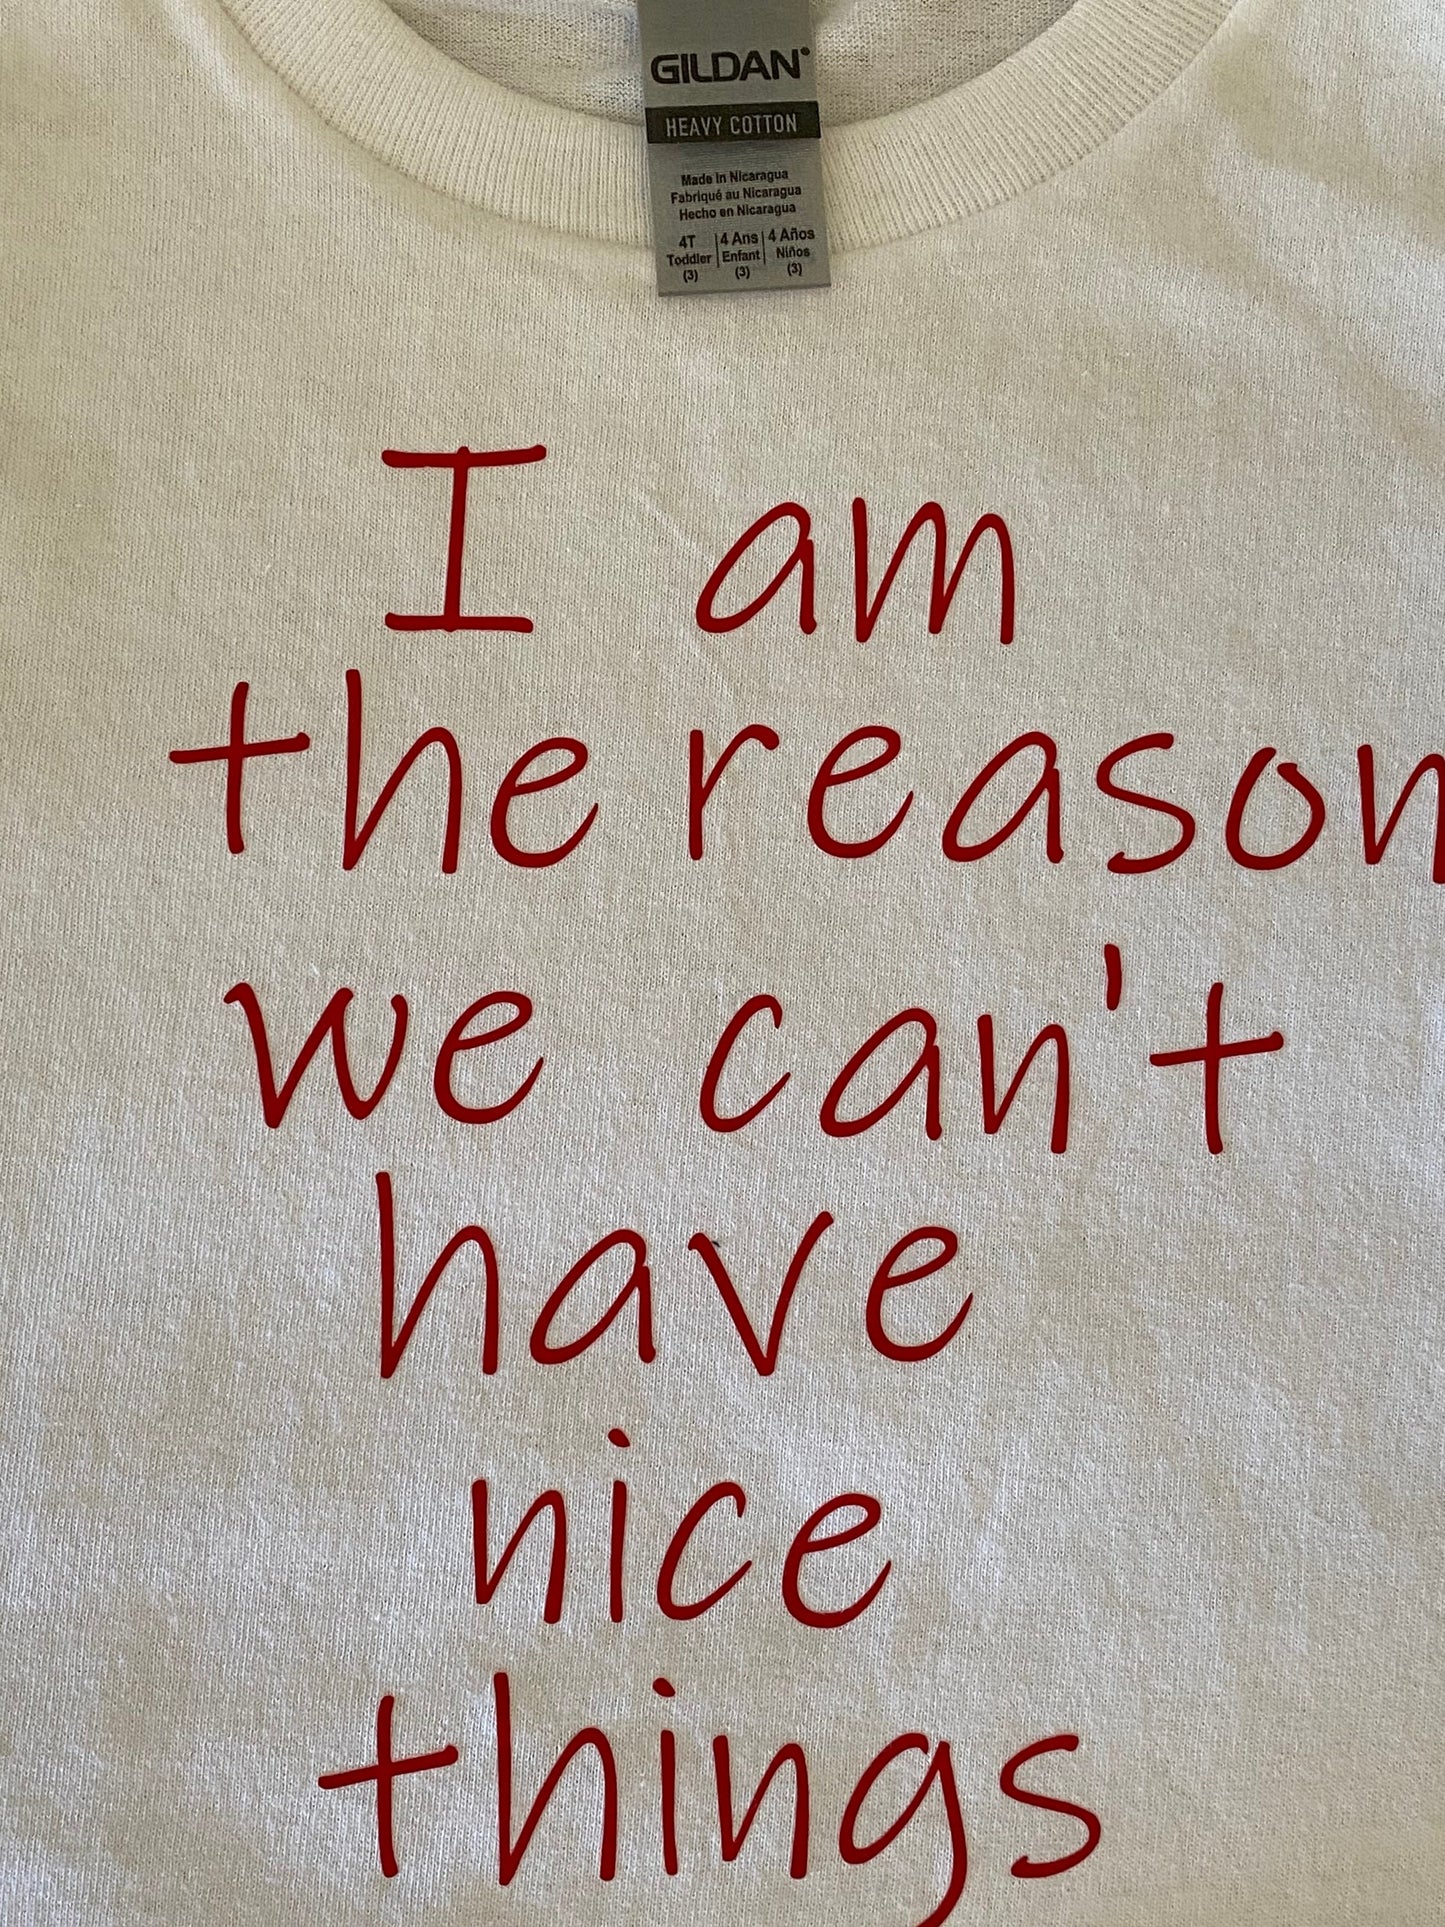 I am the reason we can't have nice things / funny shirt /funny tshirt/funny t shirt / cant have nice things/funny kids shirt/reckless gift